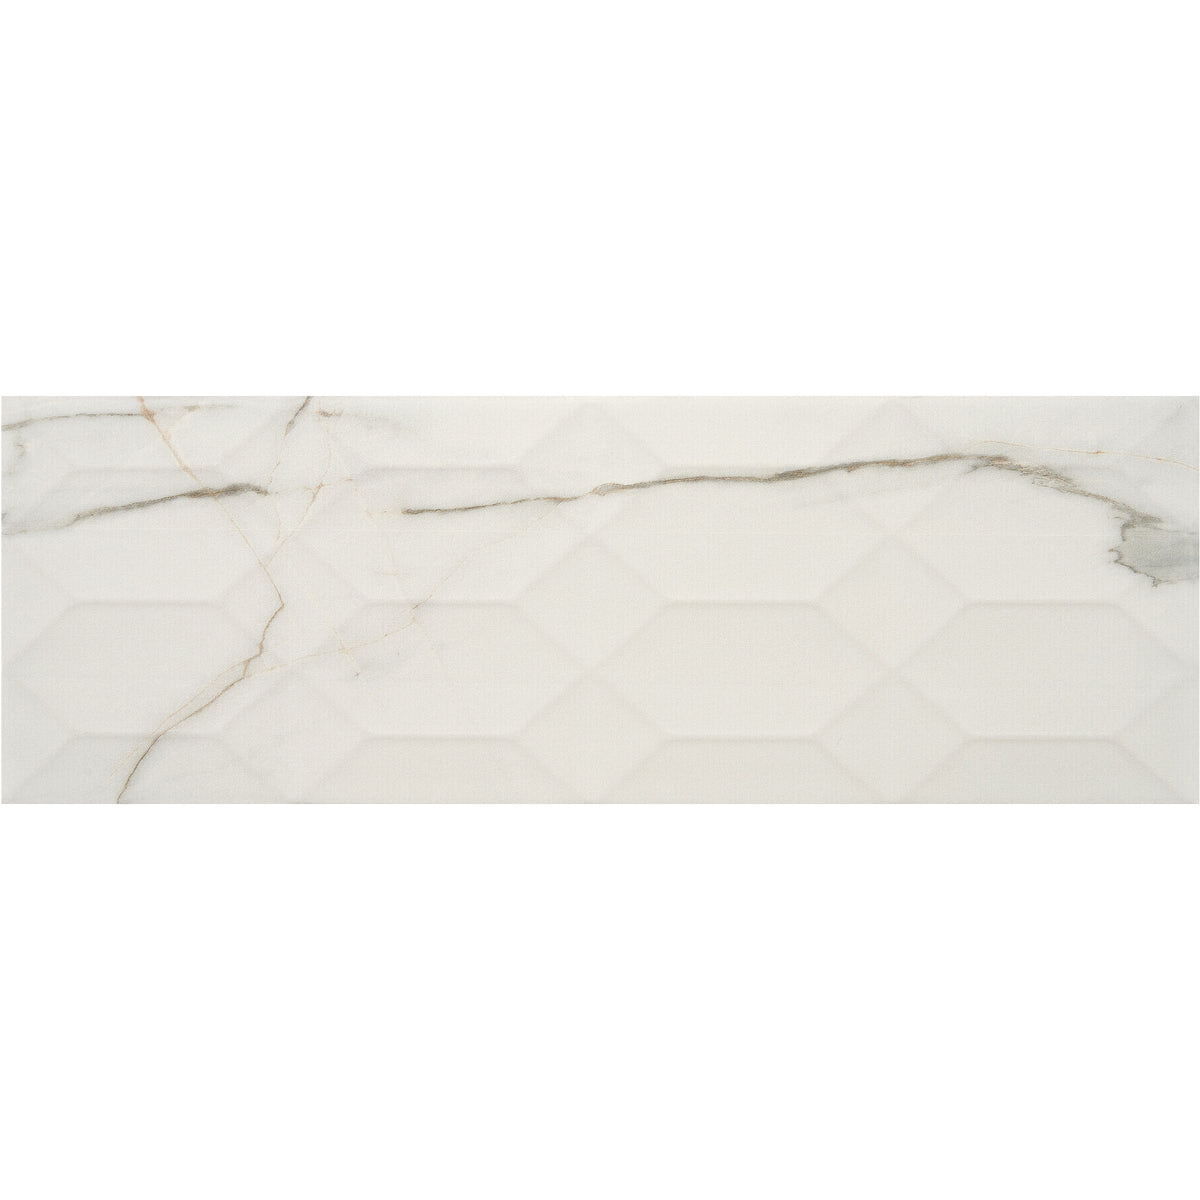 American Olean - Mythique Marble 8 in. x 24 in. Glazed Ceramic Wall Tile - Calacatta Venecia